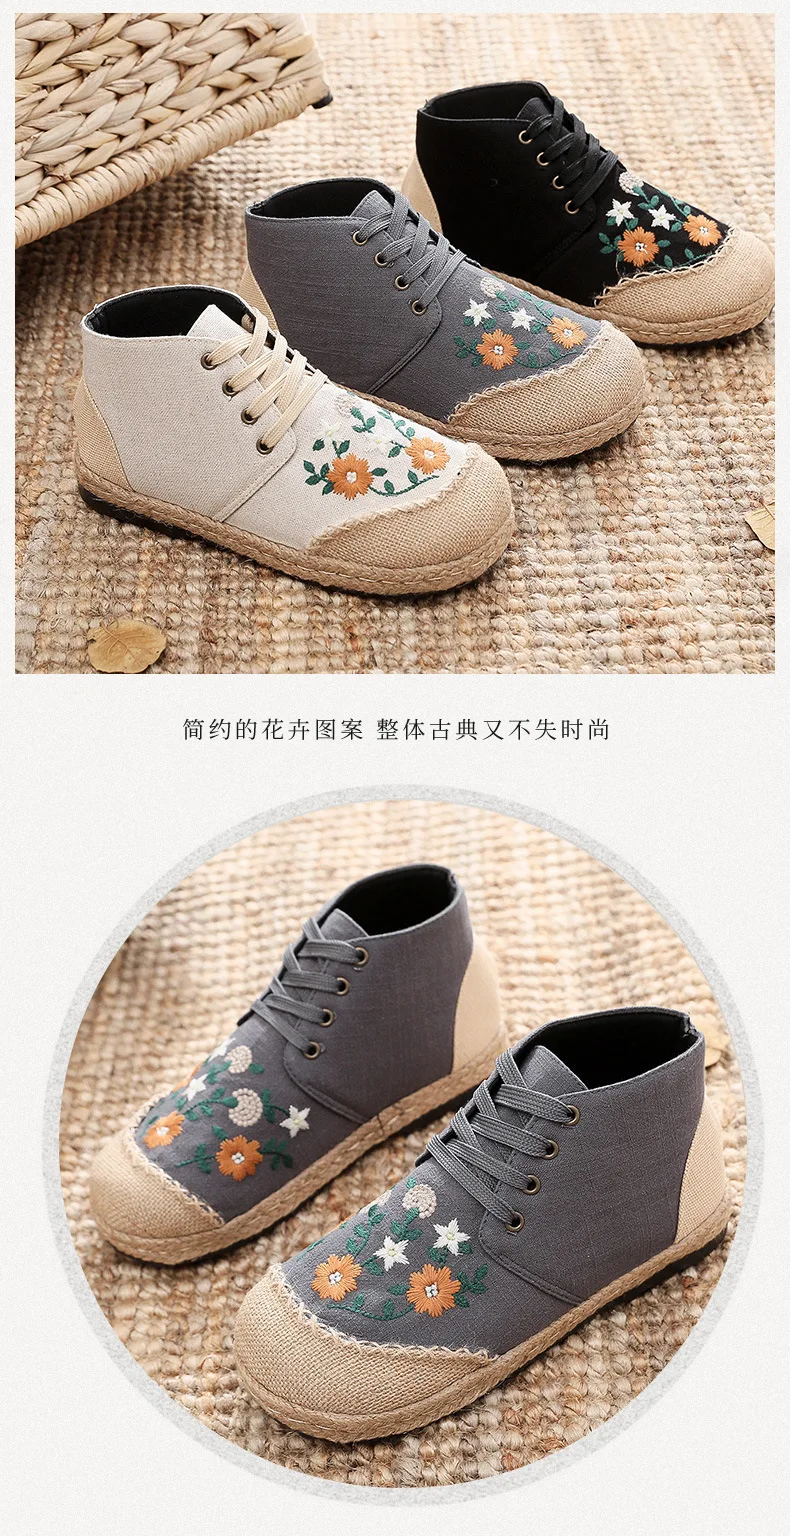 Women Handmade Vintage Embroidered Flats Booties Shoes High Top Lace Up Canvas Sneakers Female Linen Casual Leisure Espadrilles